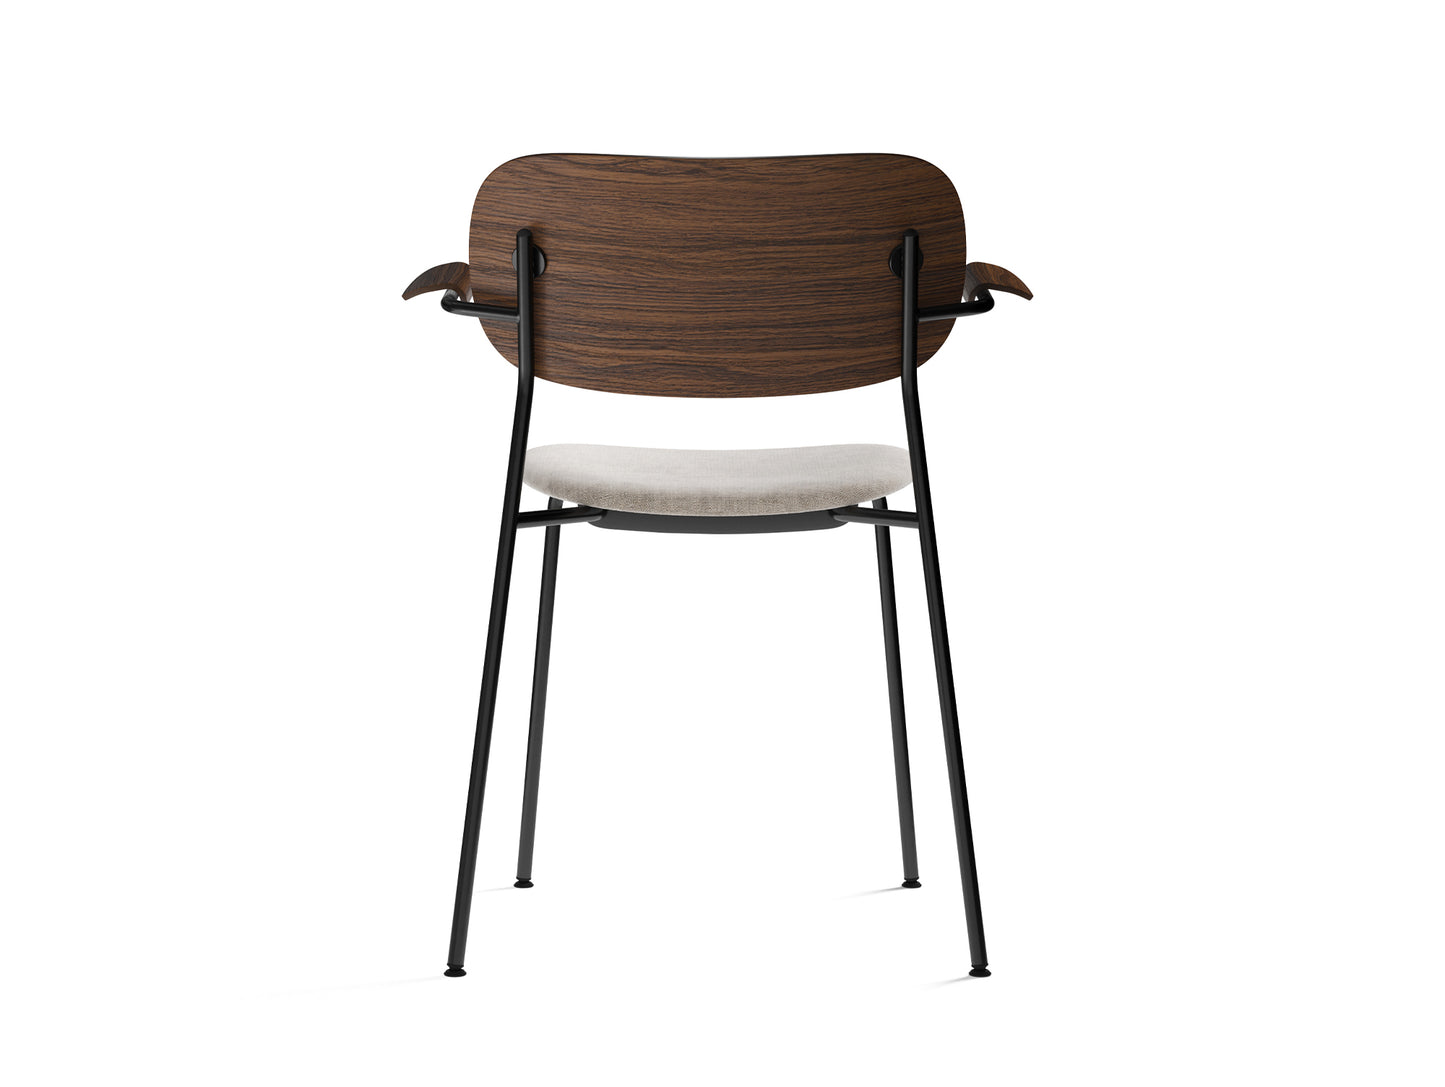 Co Dining Chair Upholstered by Menu - With Armrest / Black Powder Coated Steel / Dark Oak / Maple 222